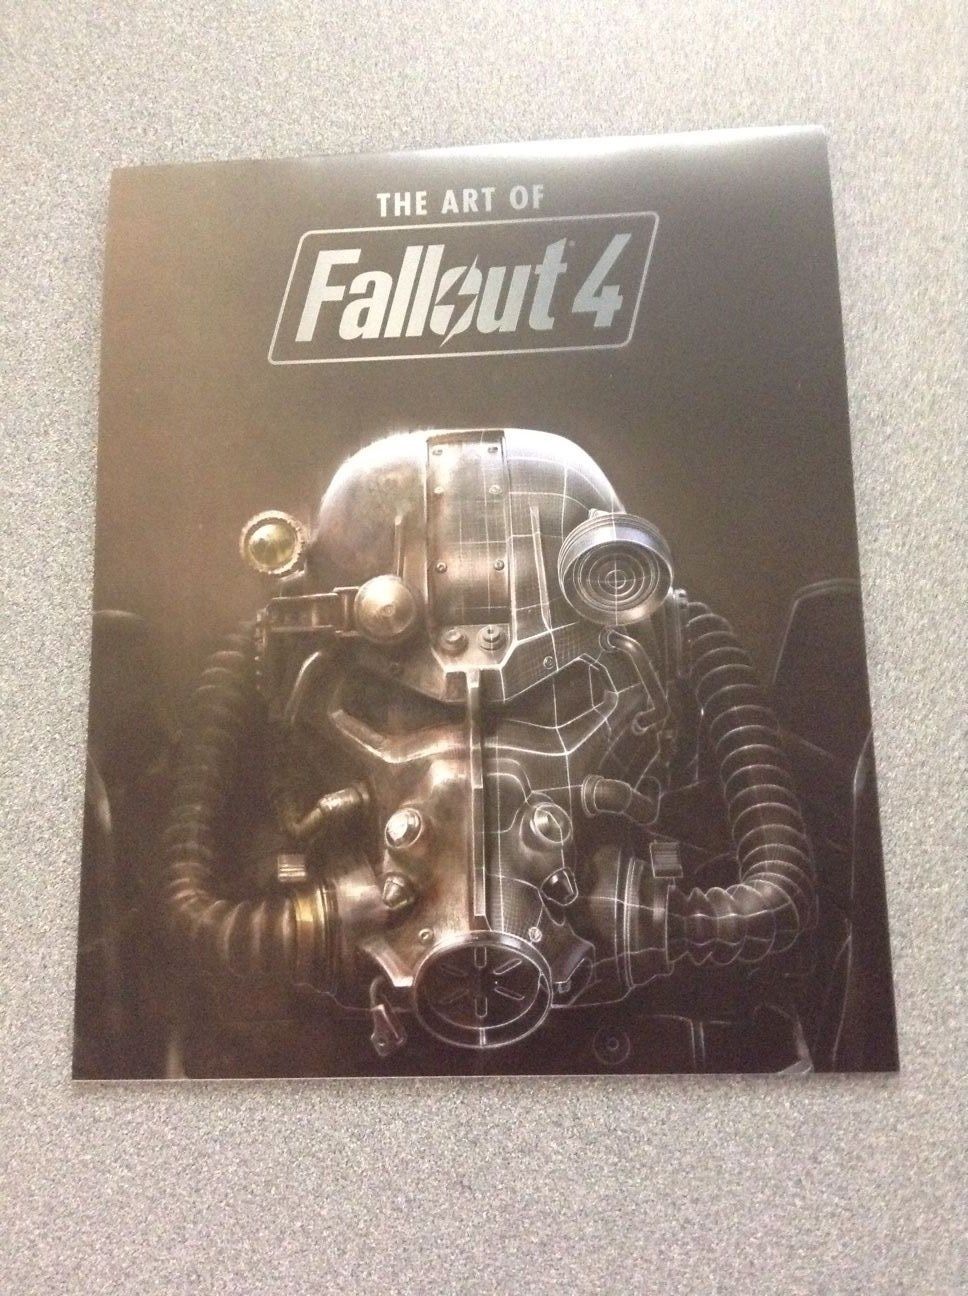 Fallout 4 Limited Edition The Art Of Fallout 4 Calendar 2015-2016 Art Prints